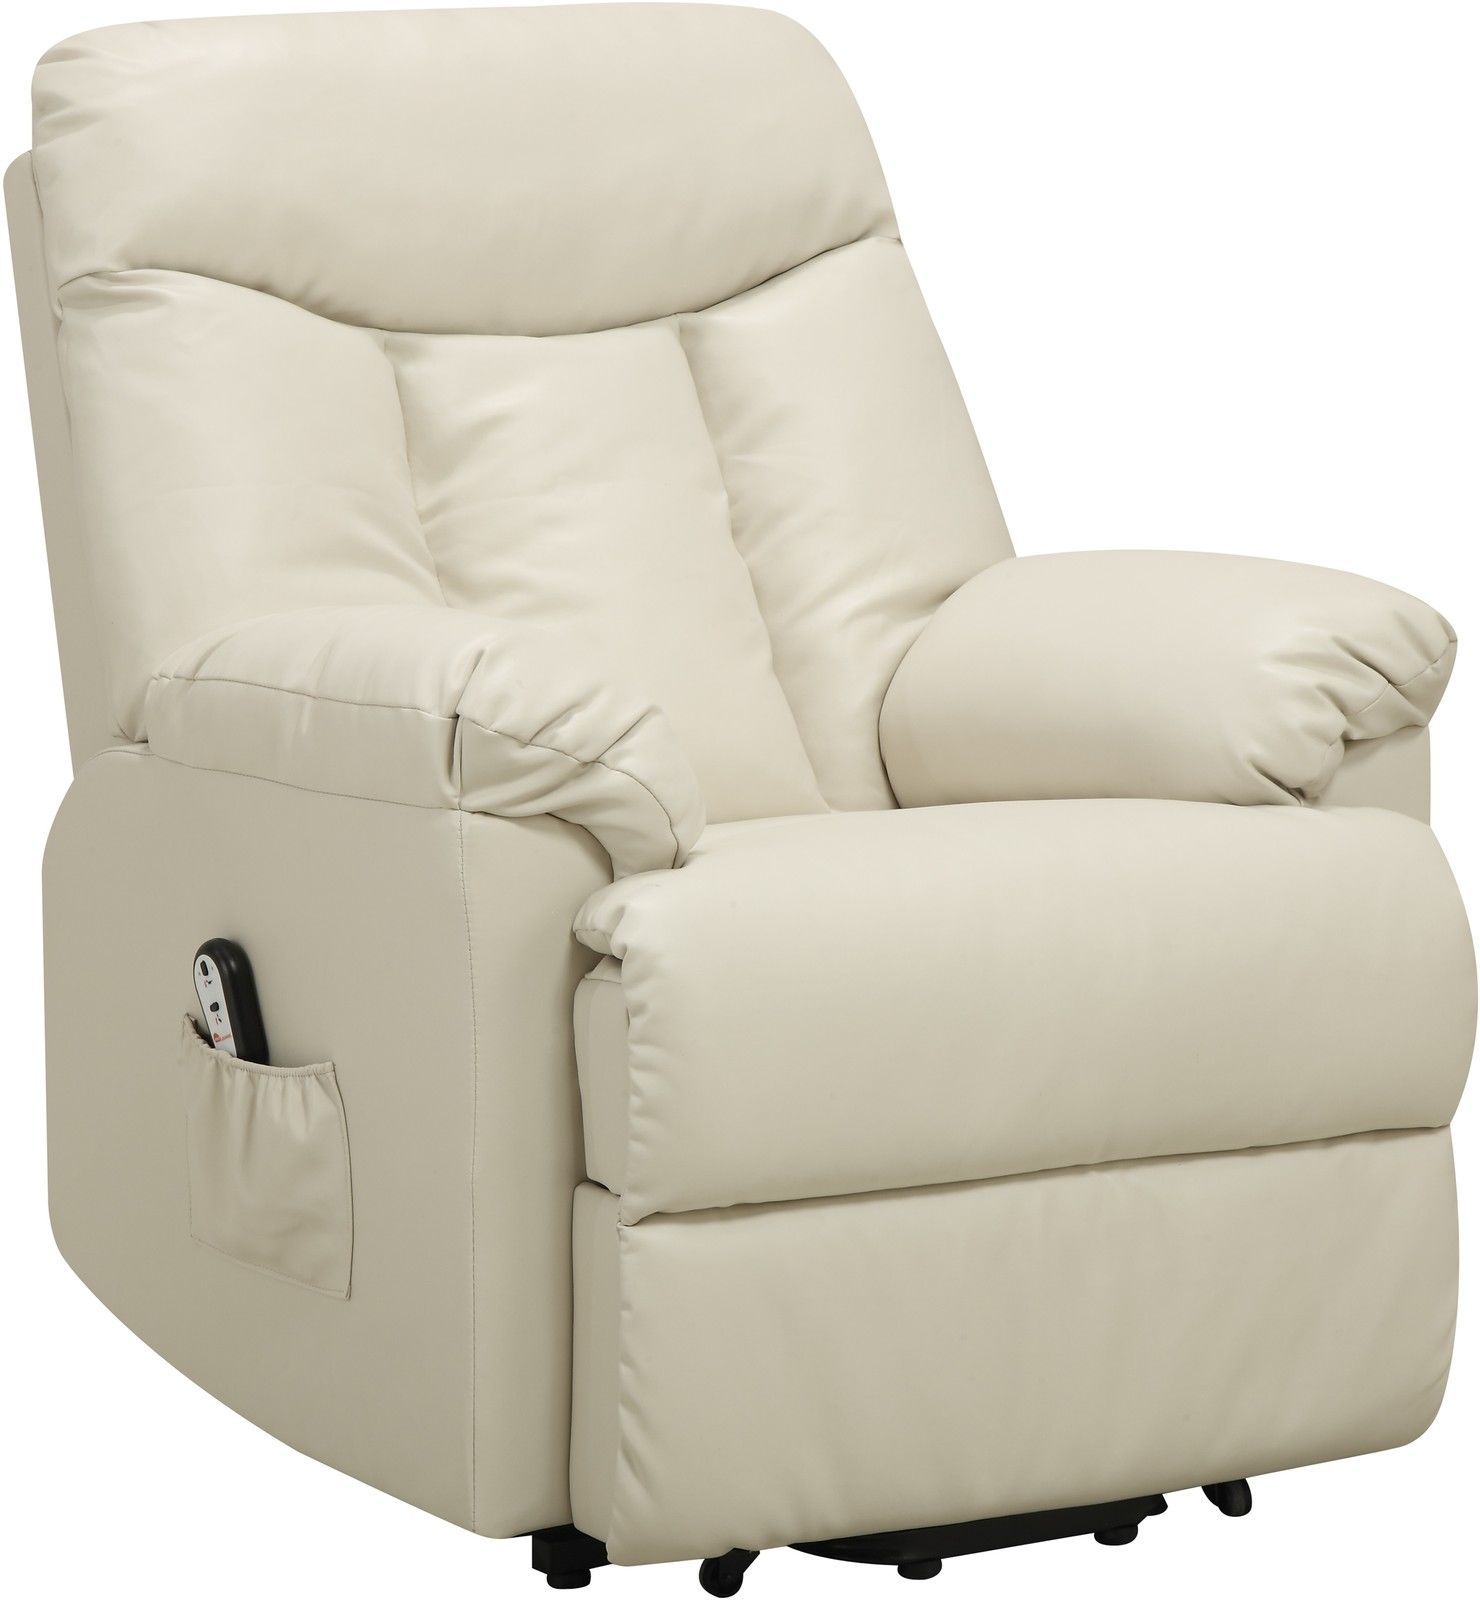 Electric Lift Chair Recliner Cream Leather Power Motion ...